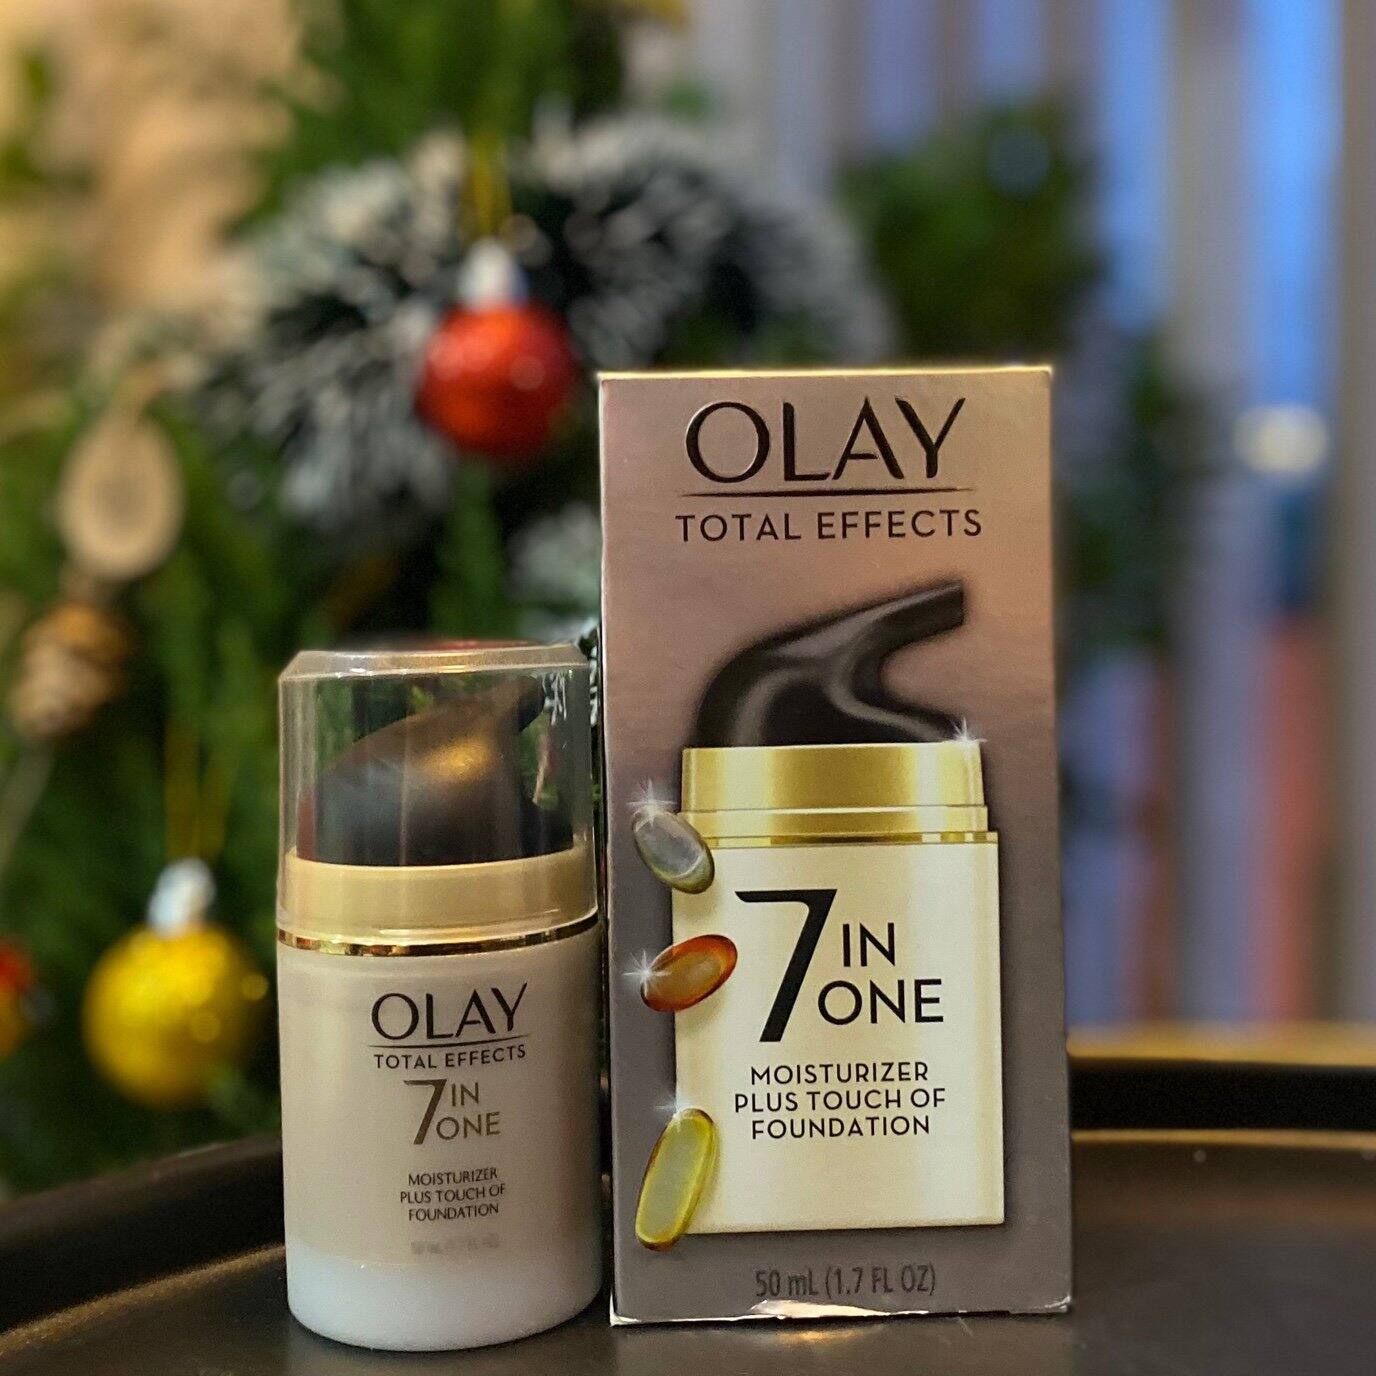 Kem dưỡng OLAY total effects 7 IN ONE Moisturizer Plus Touch Of Foundation - 50ml thumbnail